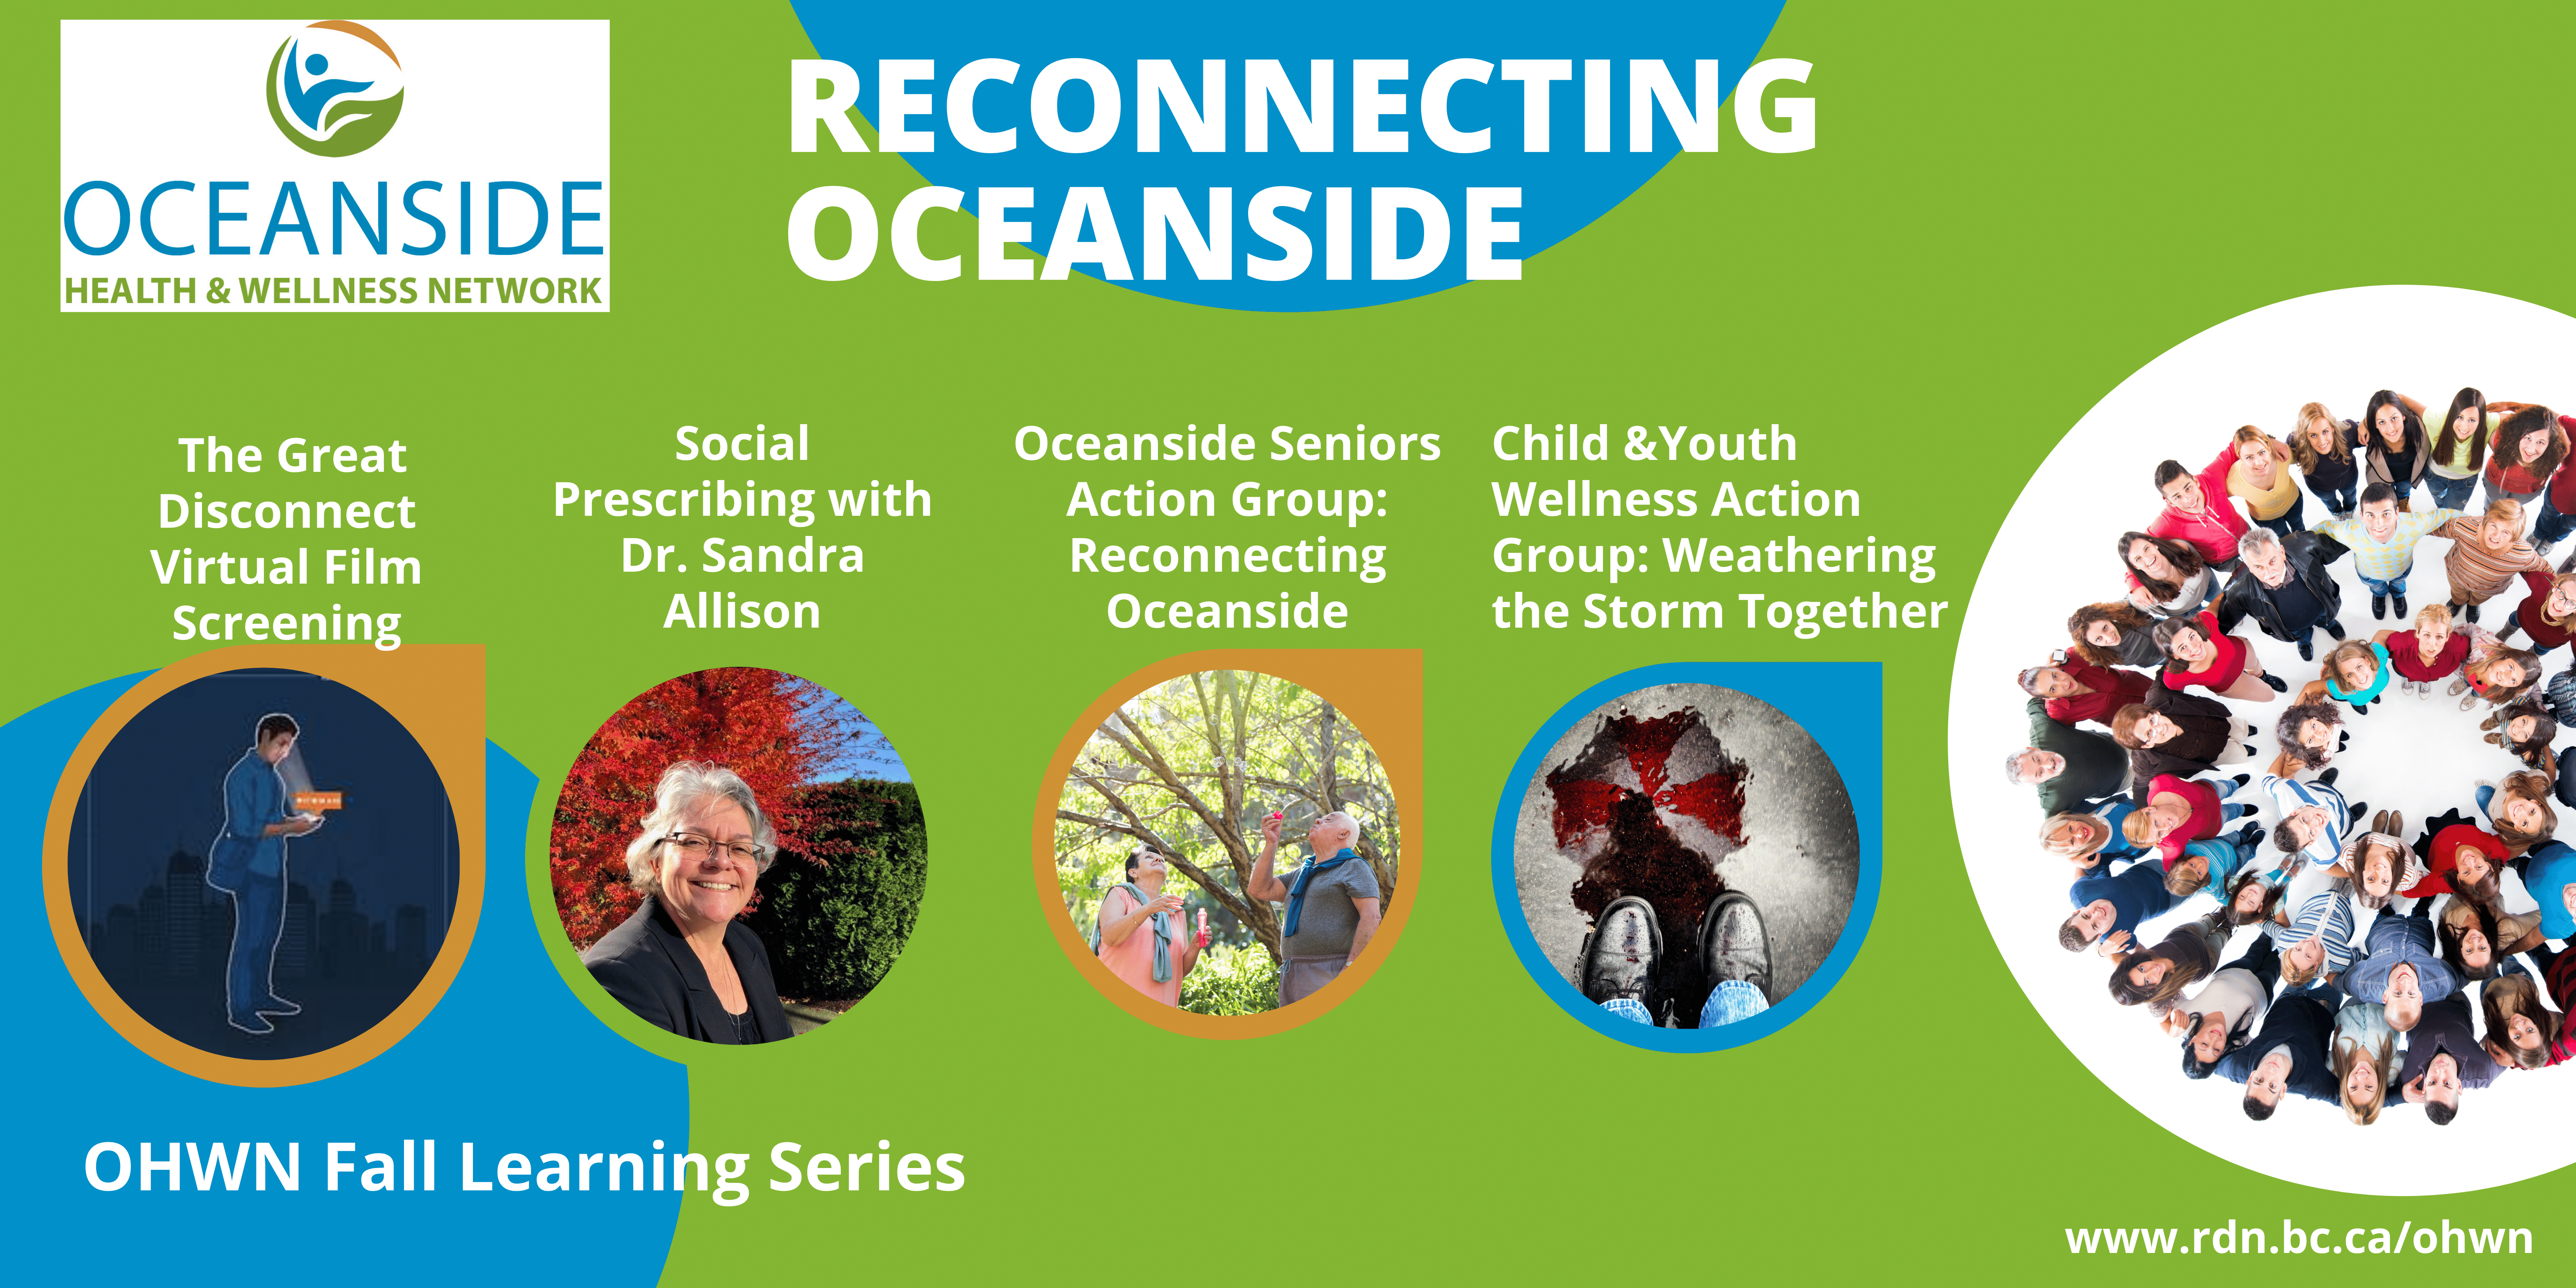 Reconnection Oceanside